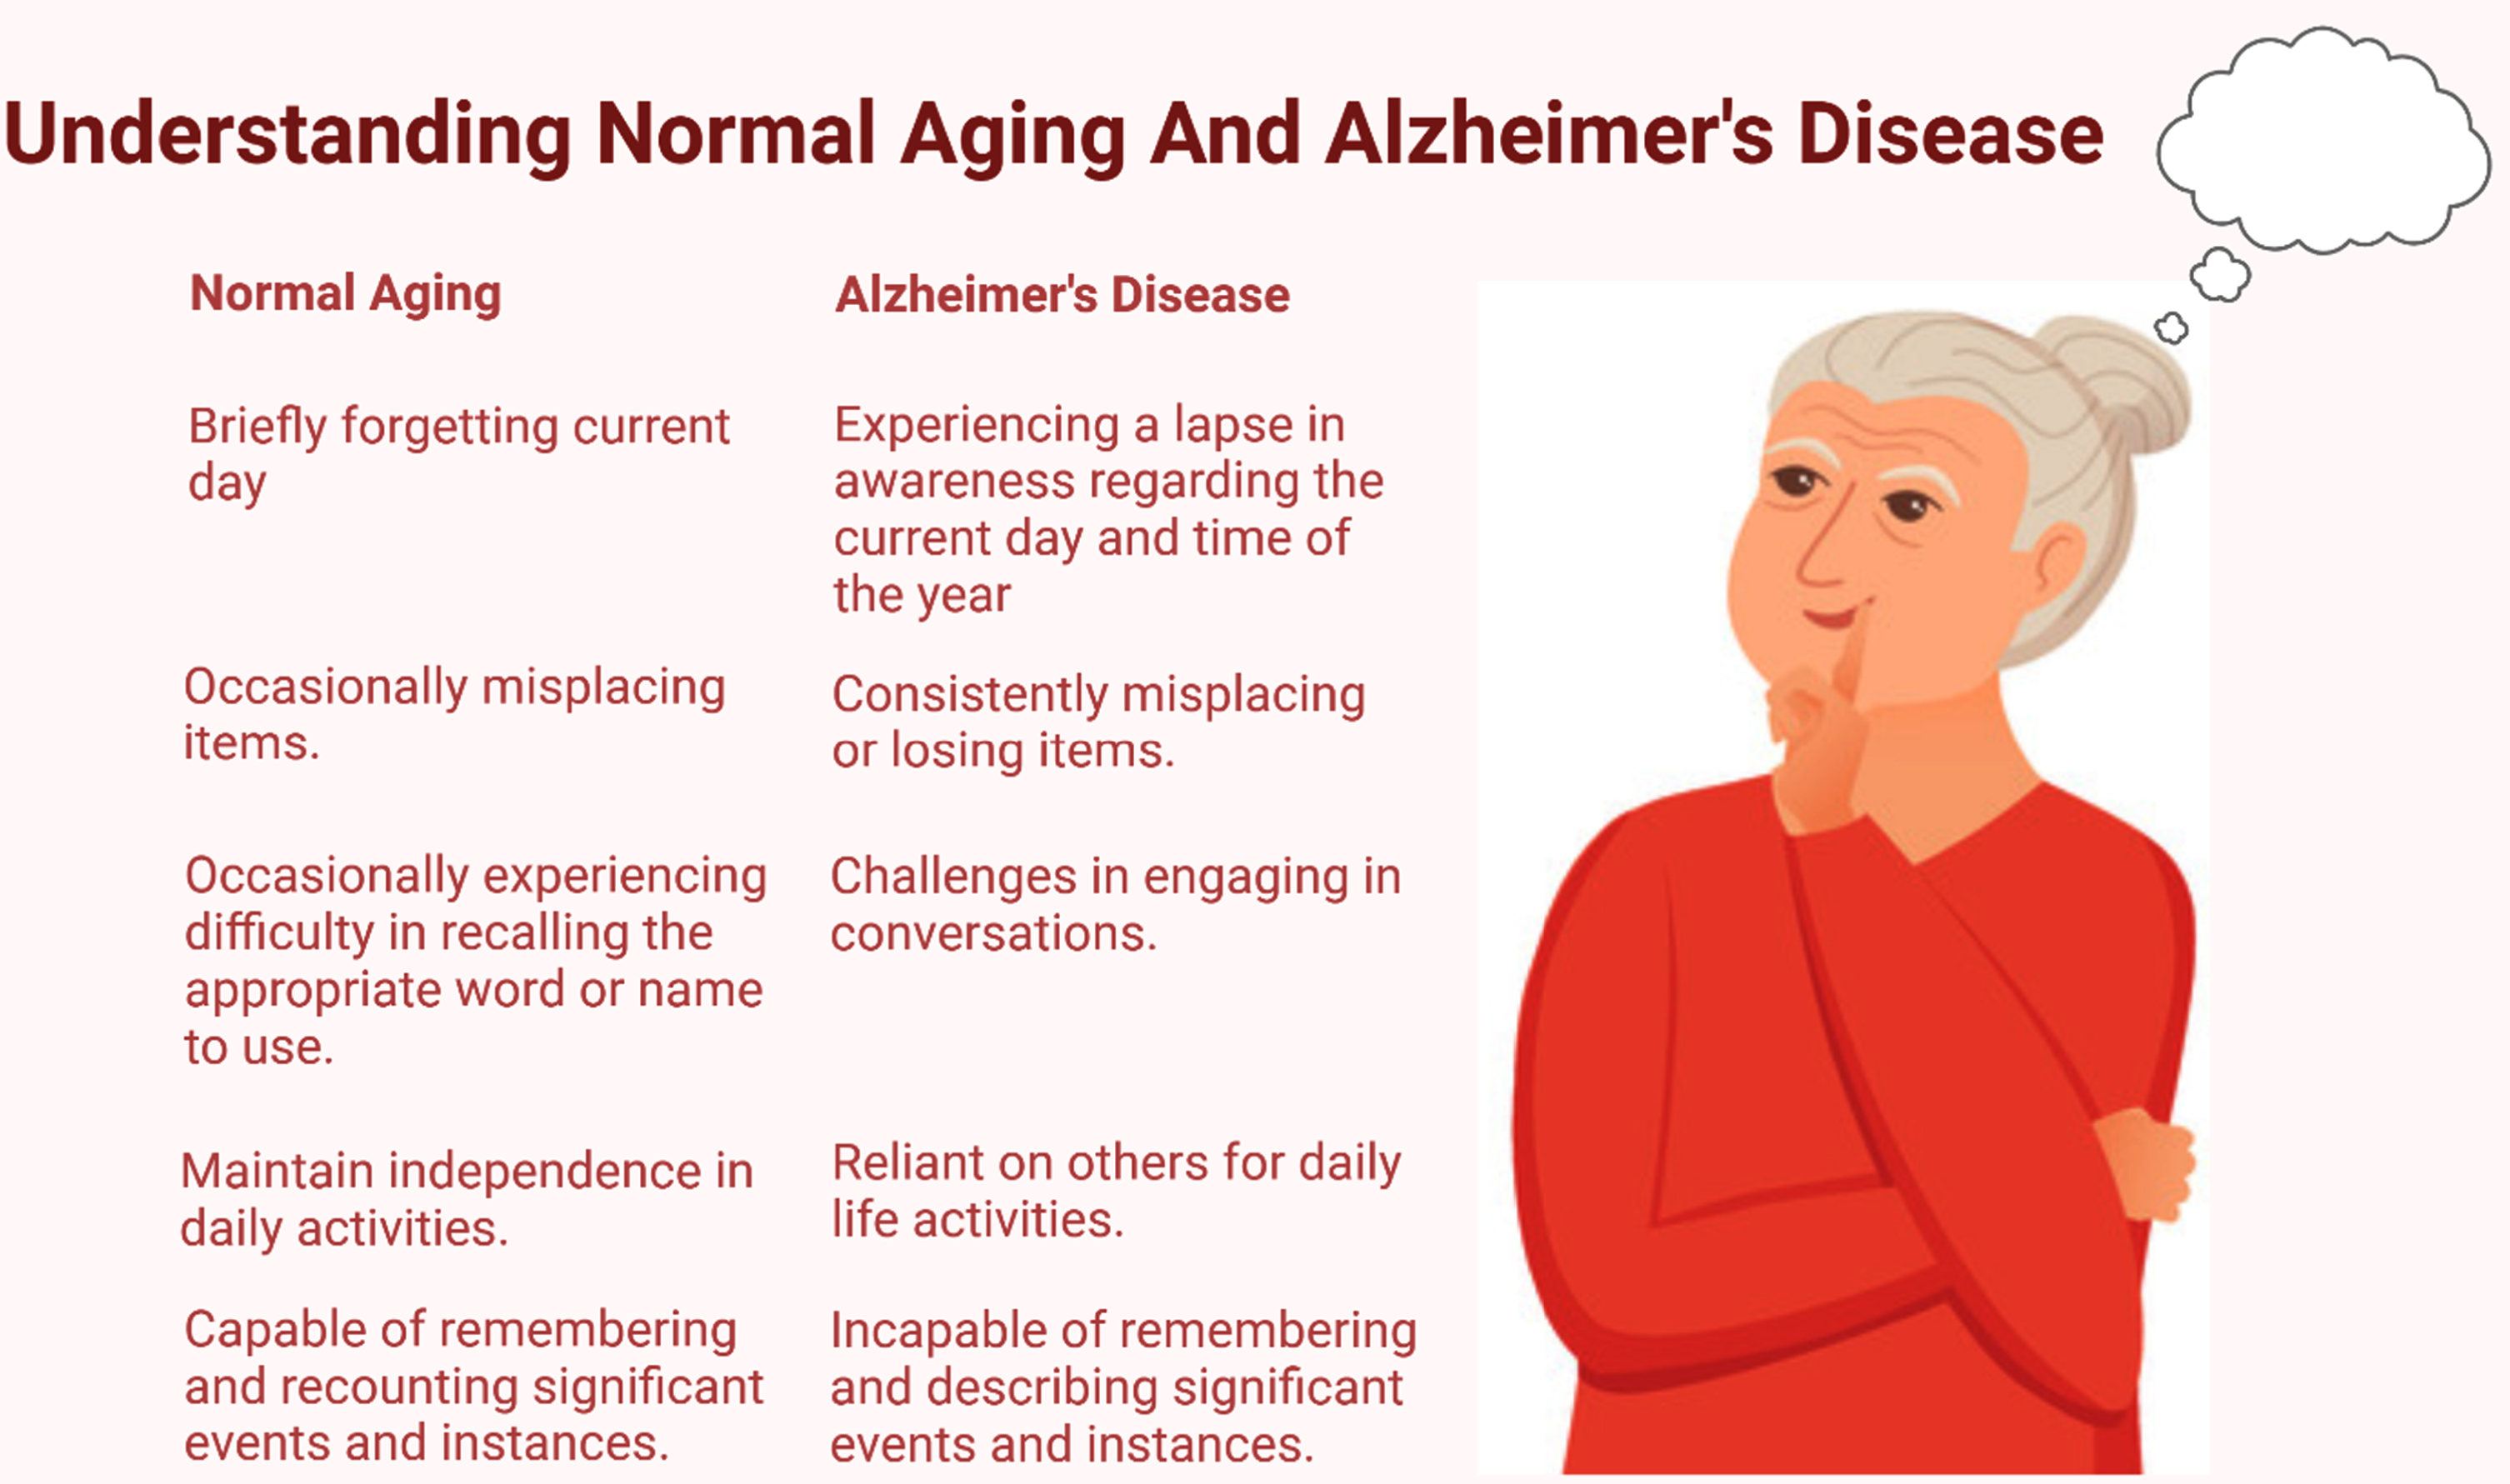 Understanding the difference between normal aging and Alzheimer’s disease. Alzheimer’s disease involves significant cognitive decline beyond typical age-related changes. Understanding these differences allows for early detection and intervention, enabling individuals to access appropriate care and support.